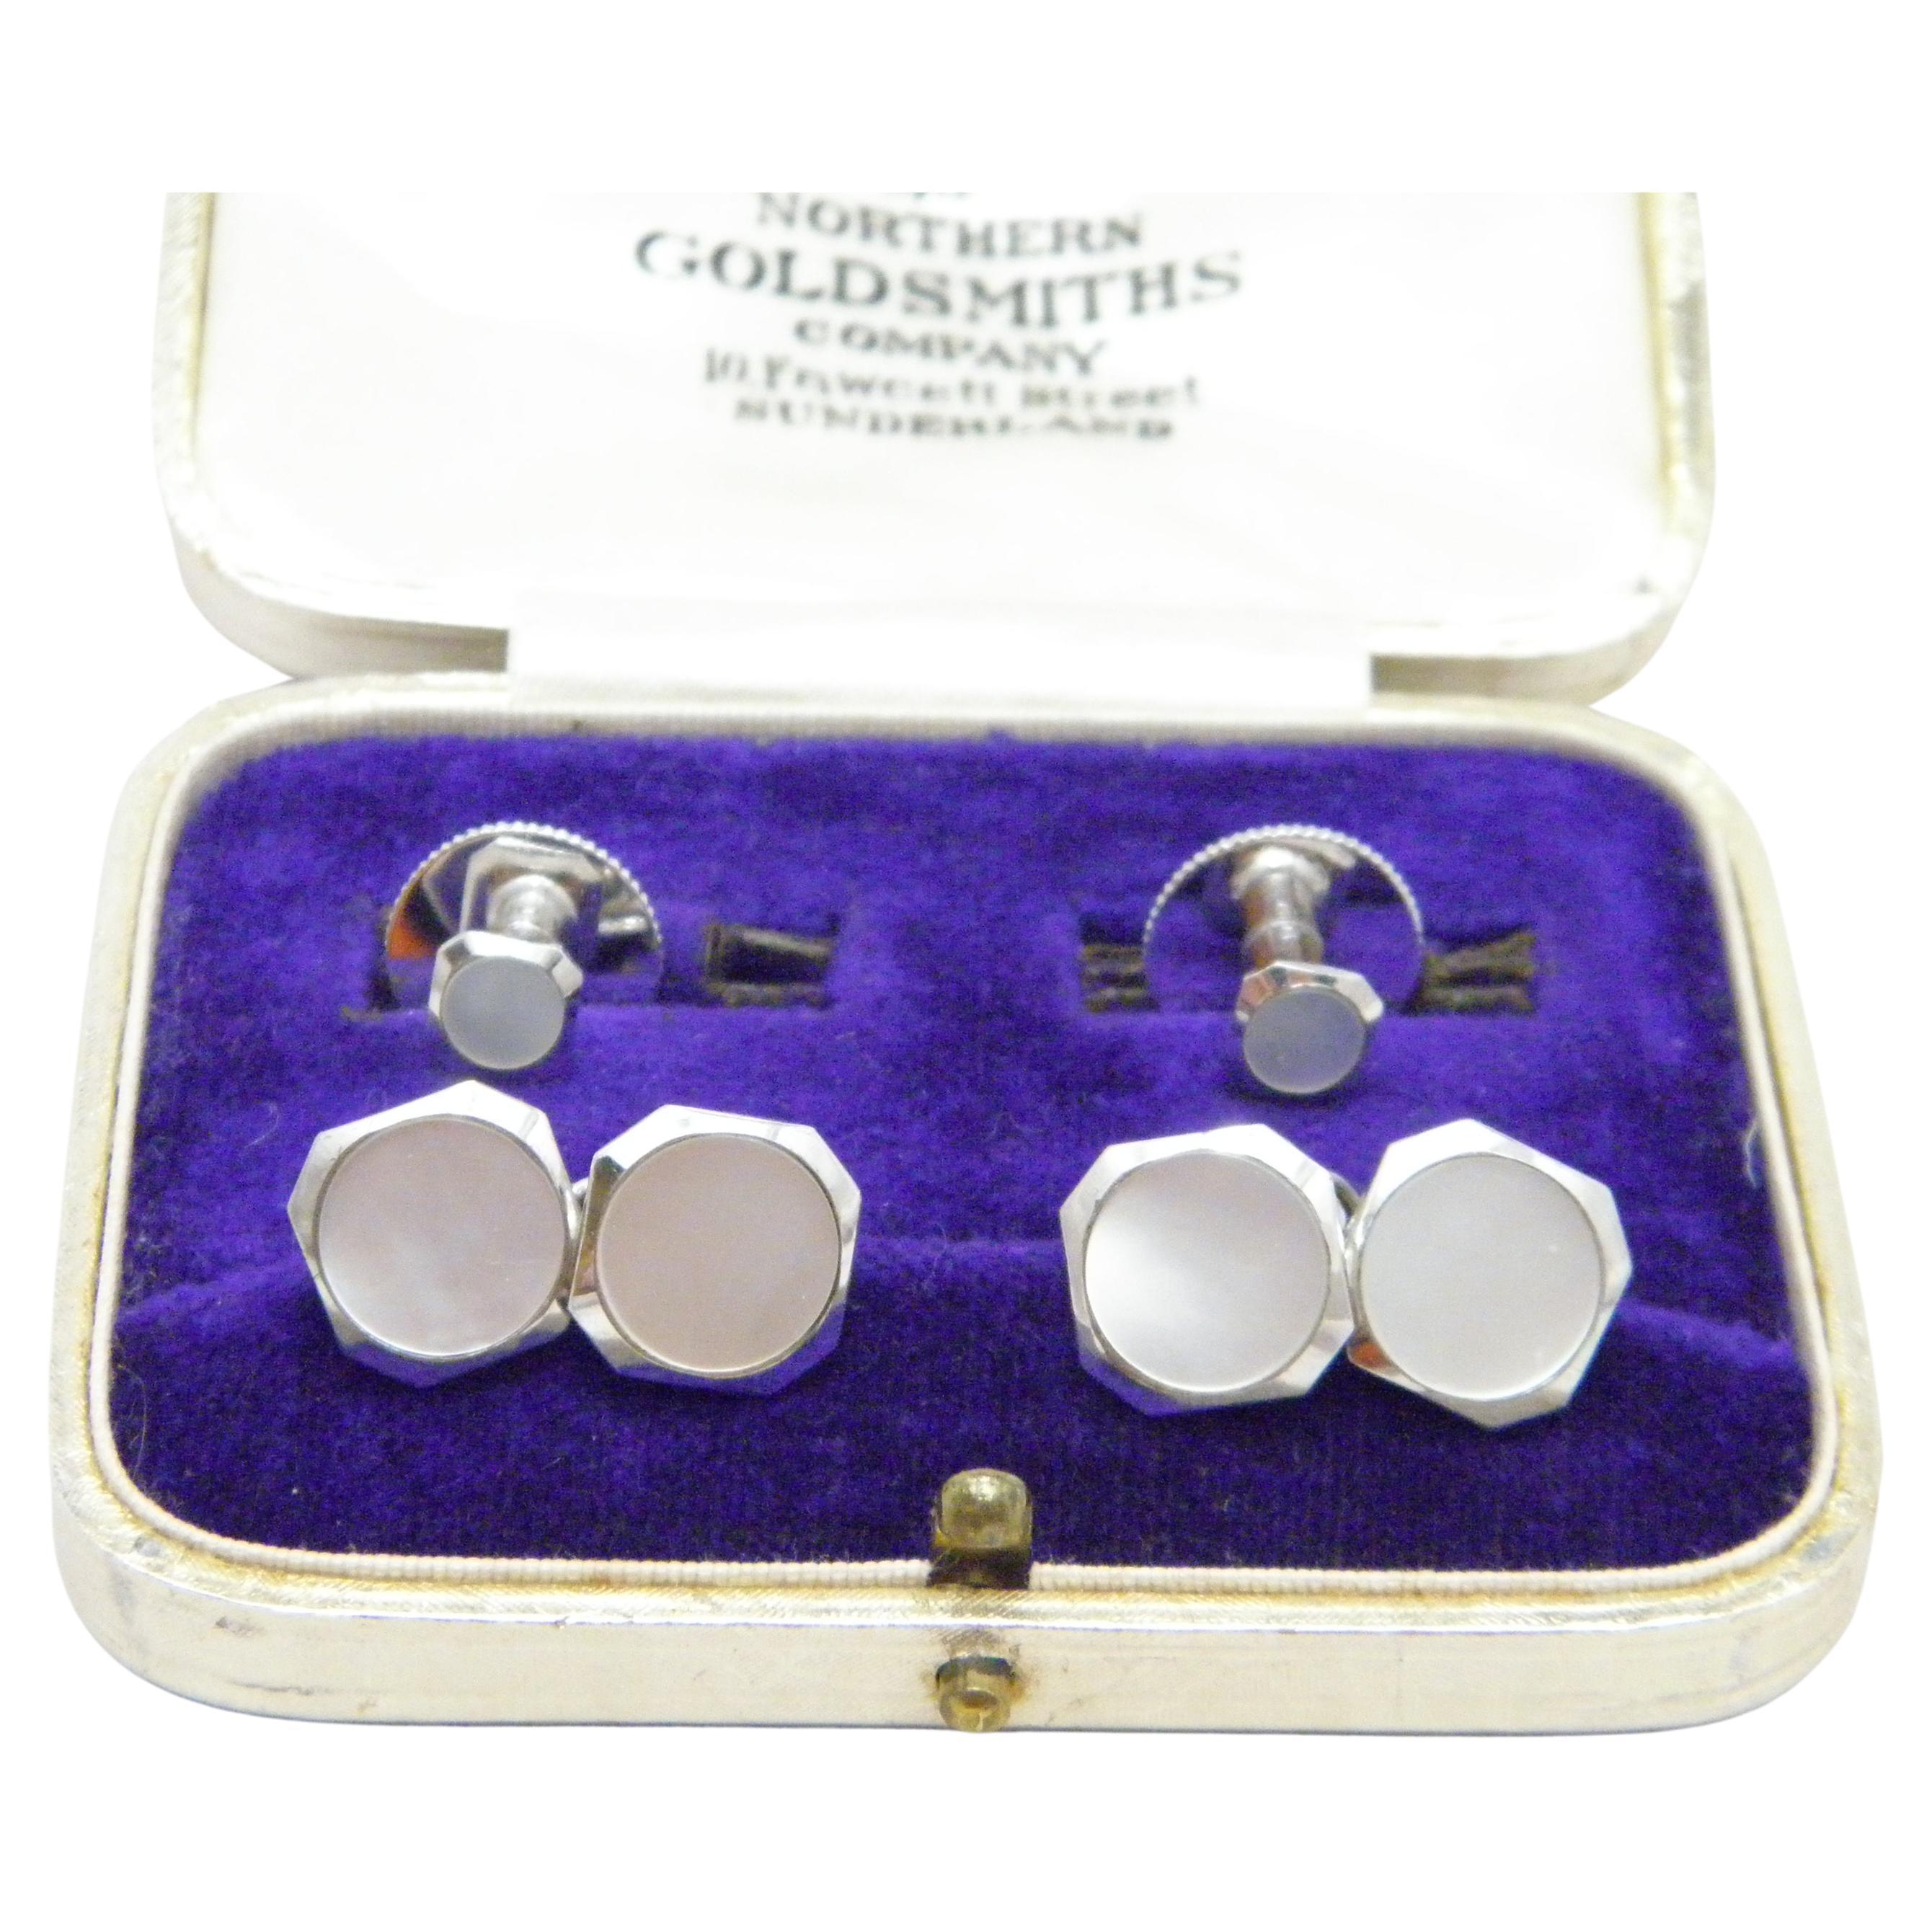 Vintage 9ct White Gold Cufflinks Collar Stud Set 375 Purity Heavy 8.2g Cuff Link For Sale